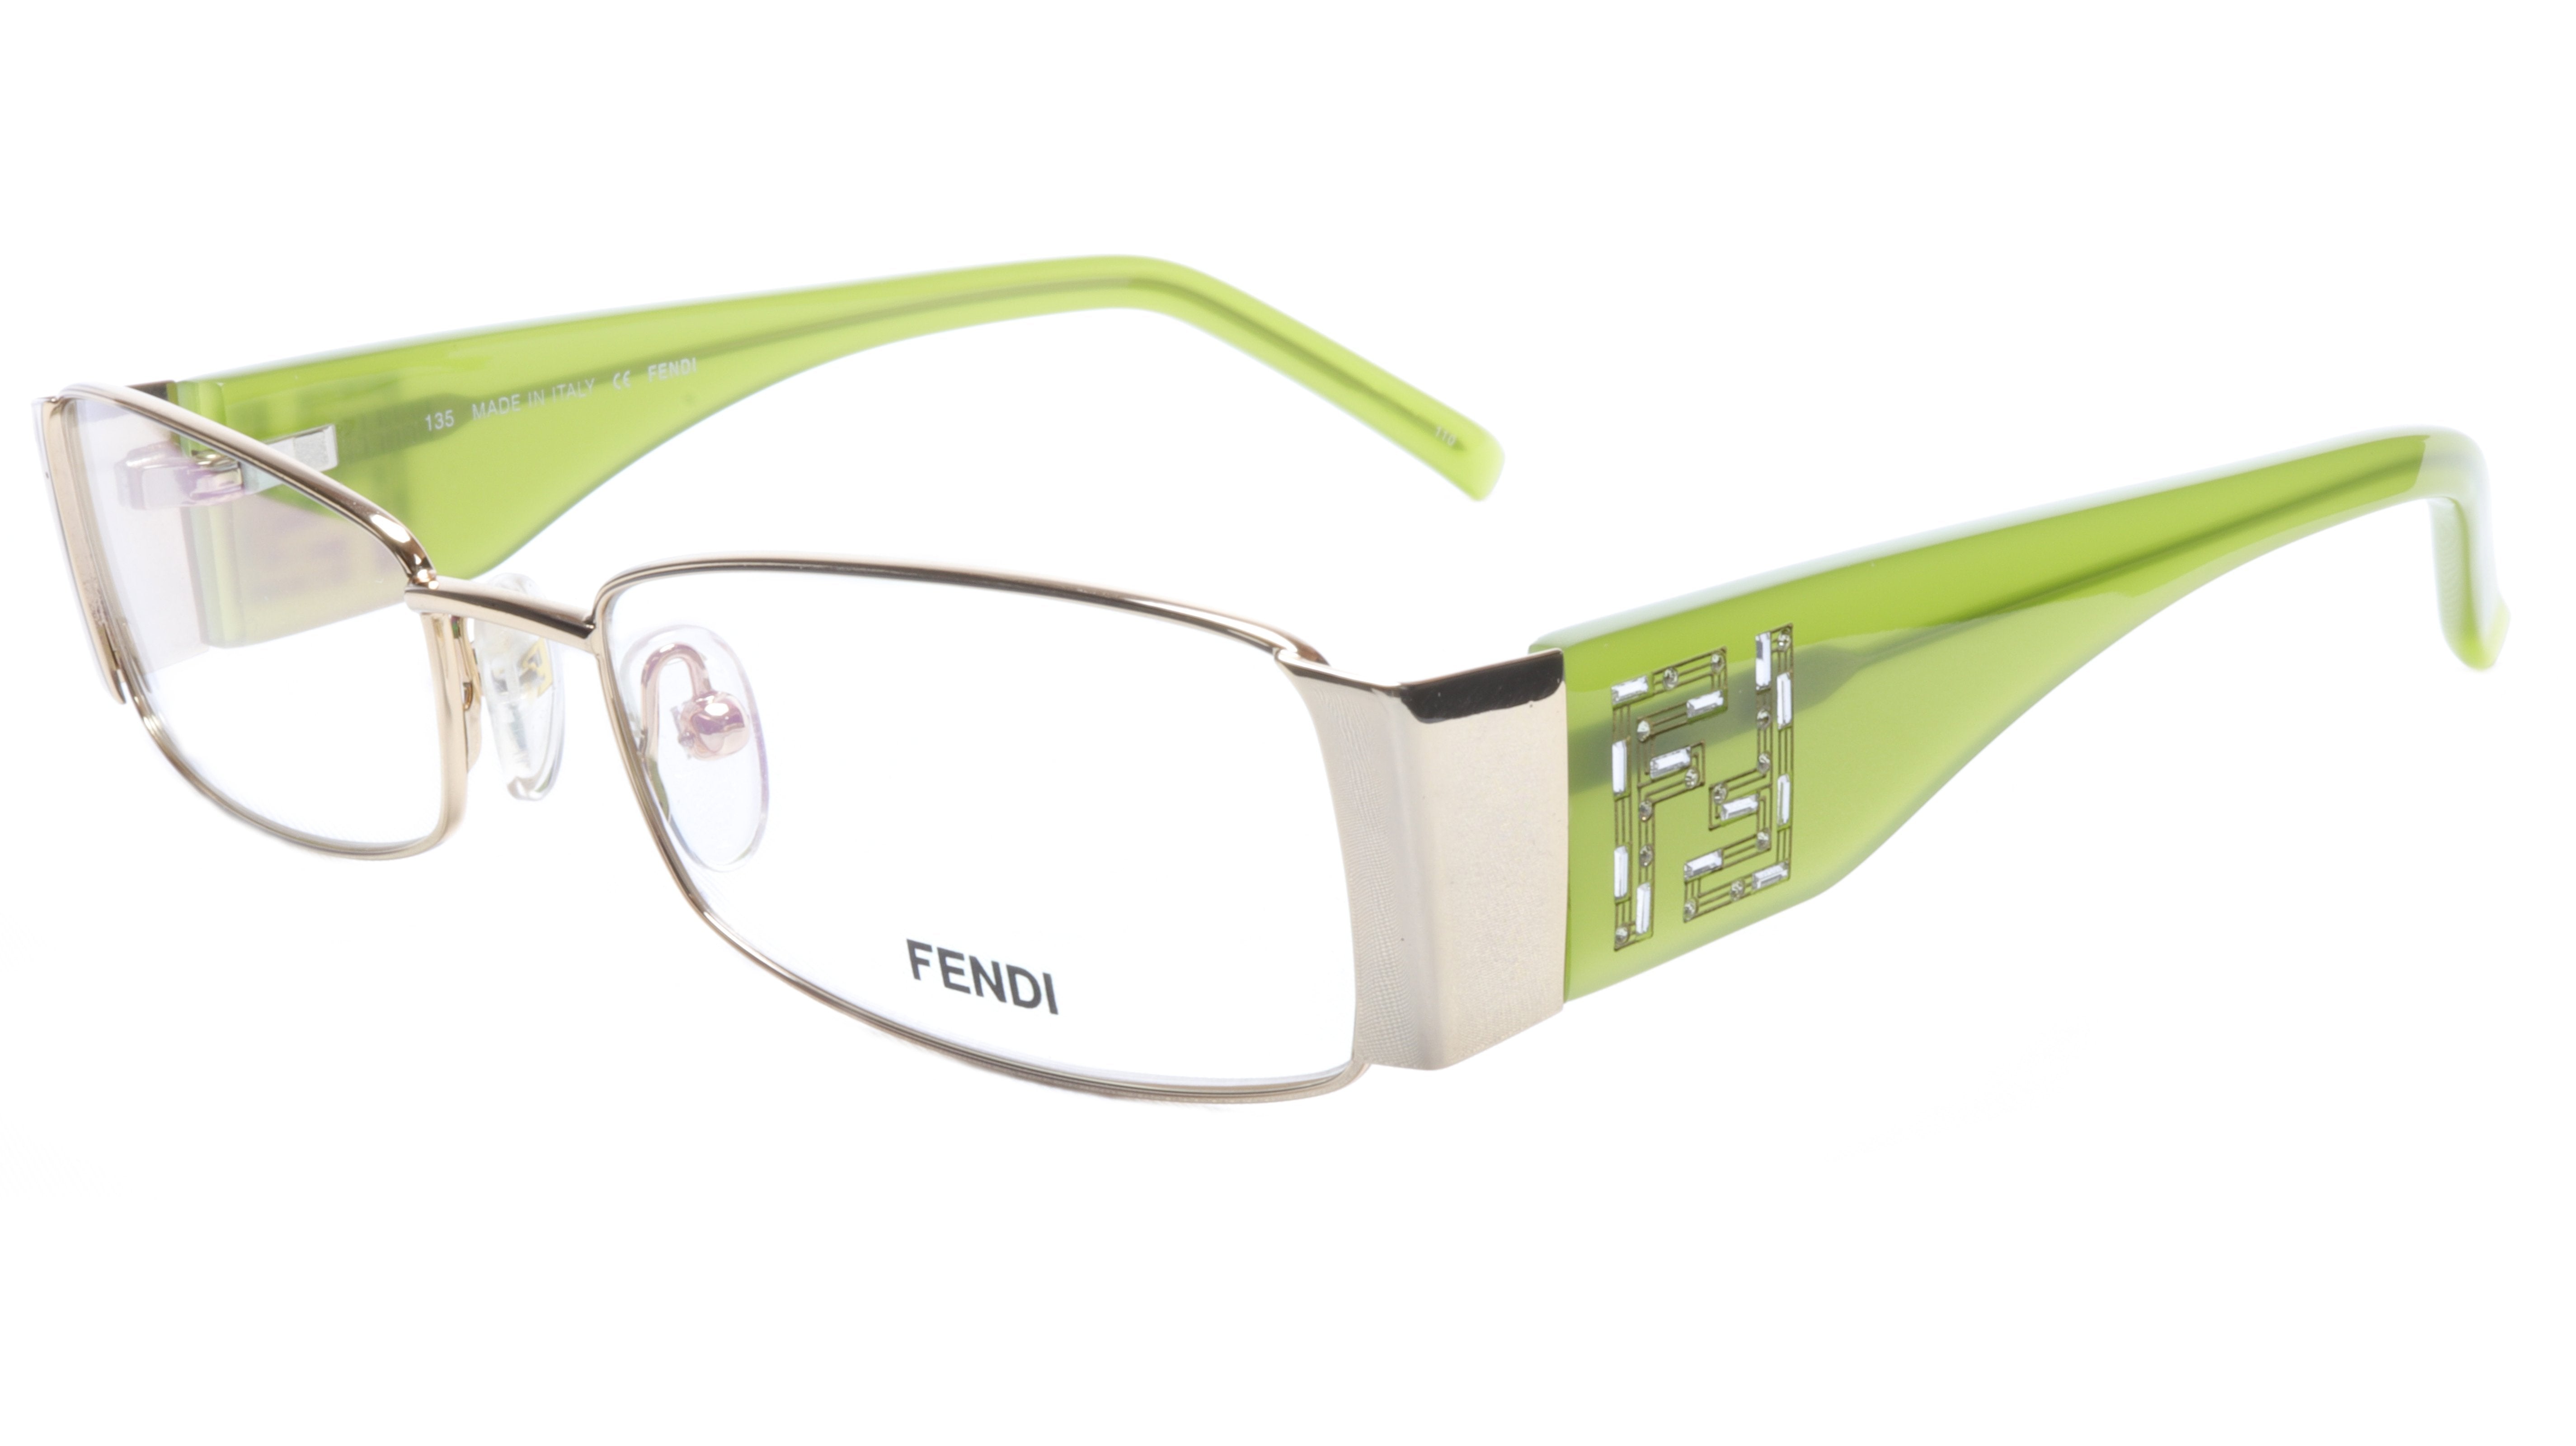 FENDI Eyewear with a Rectangular Shape in Light Green and Silver Beauty